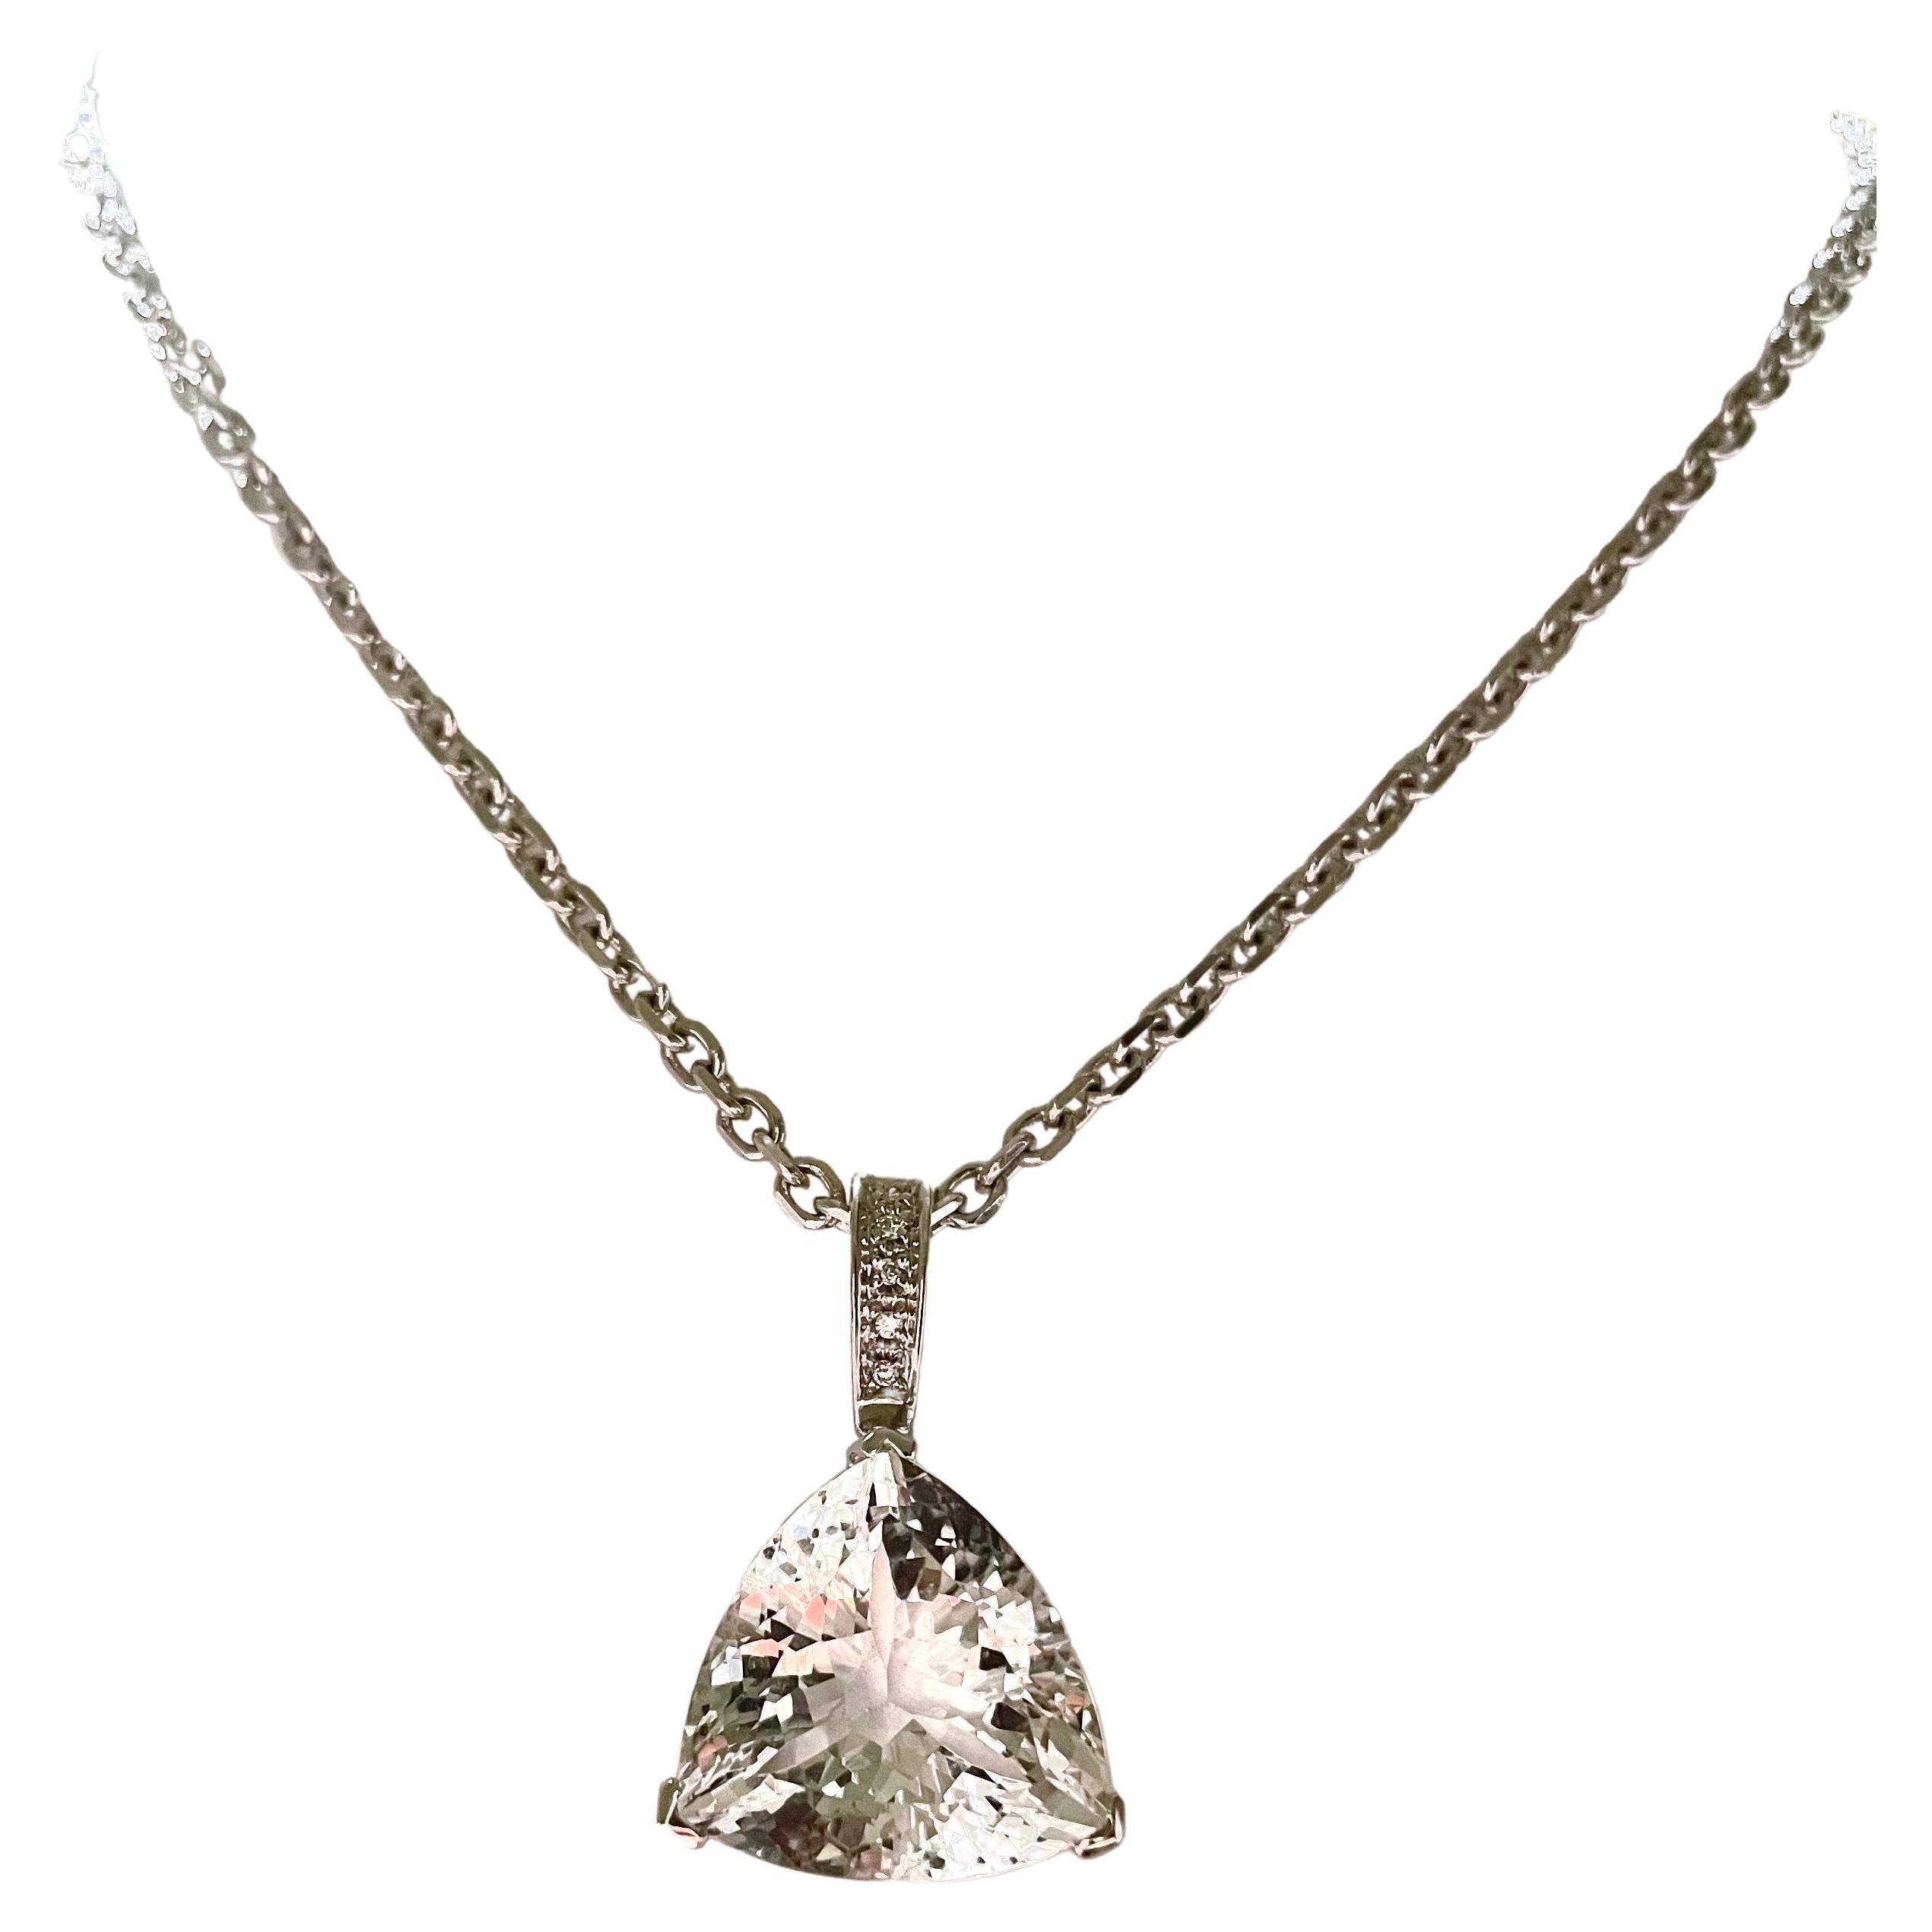 White Topaz 22 Carats Pendant with Pave Diamonds Chain Necklace For Sale